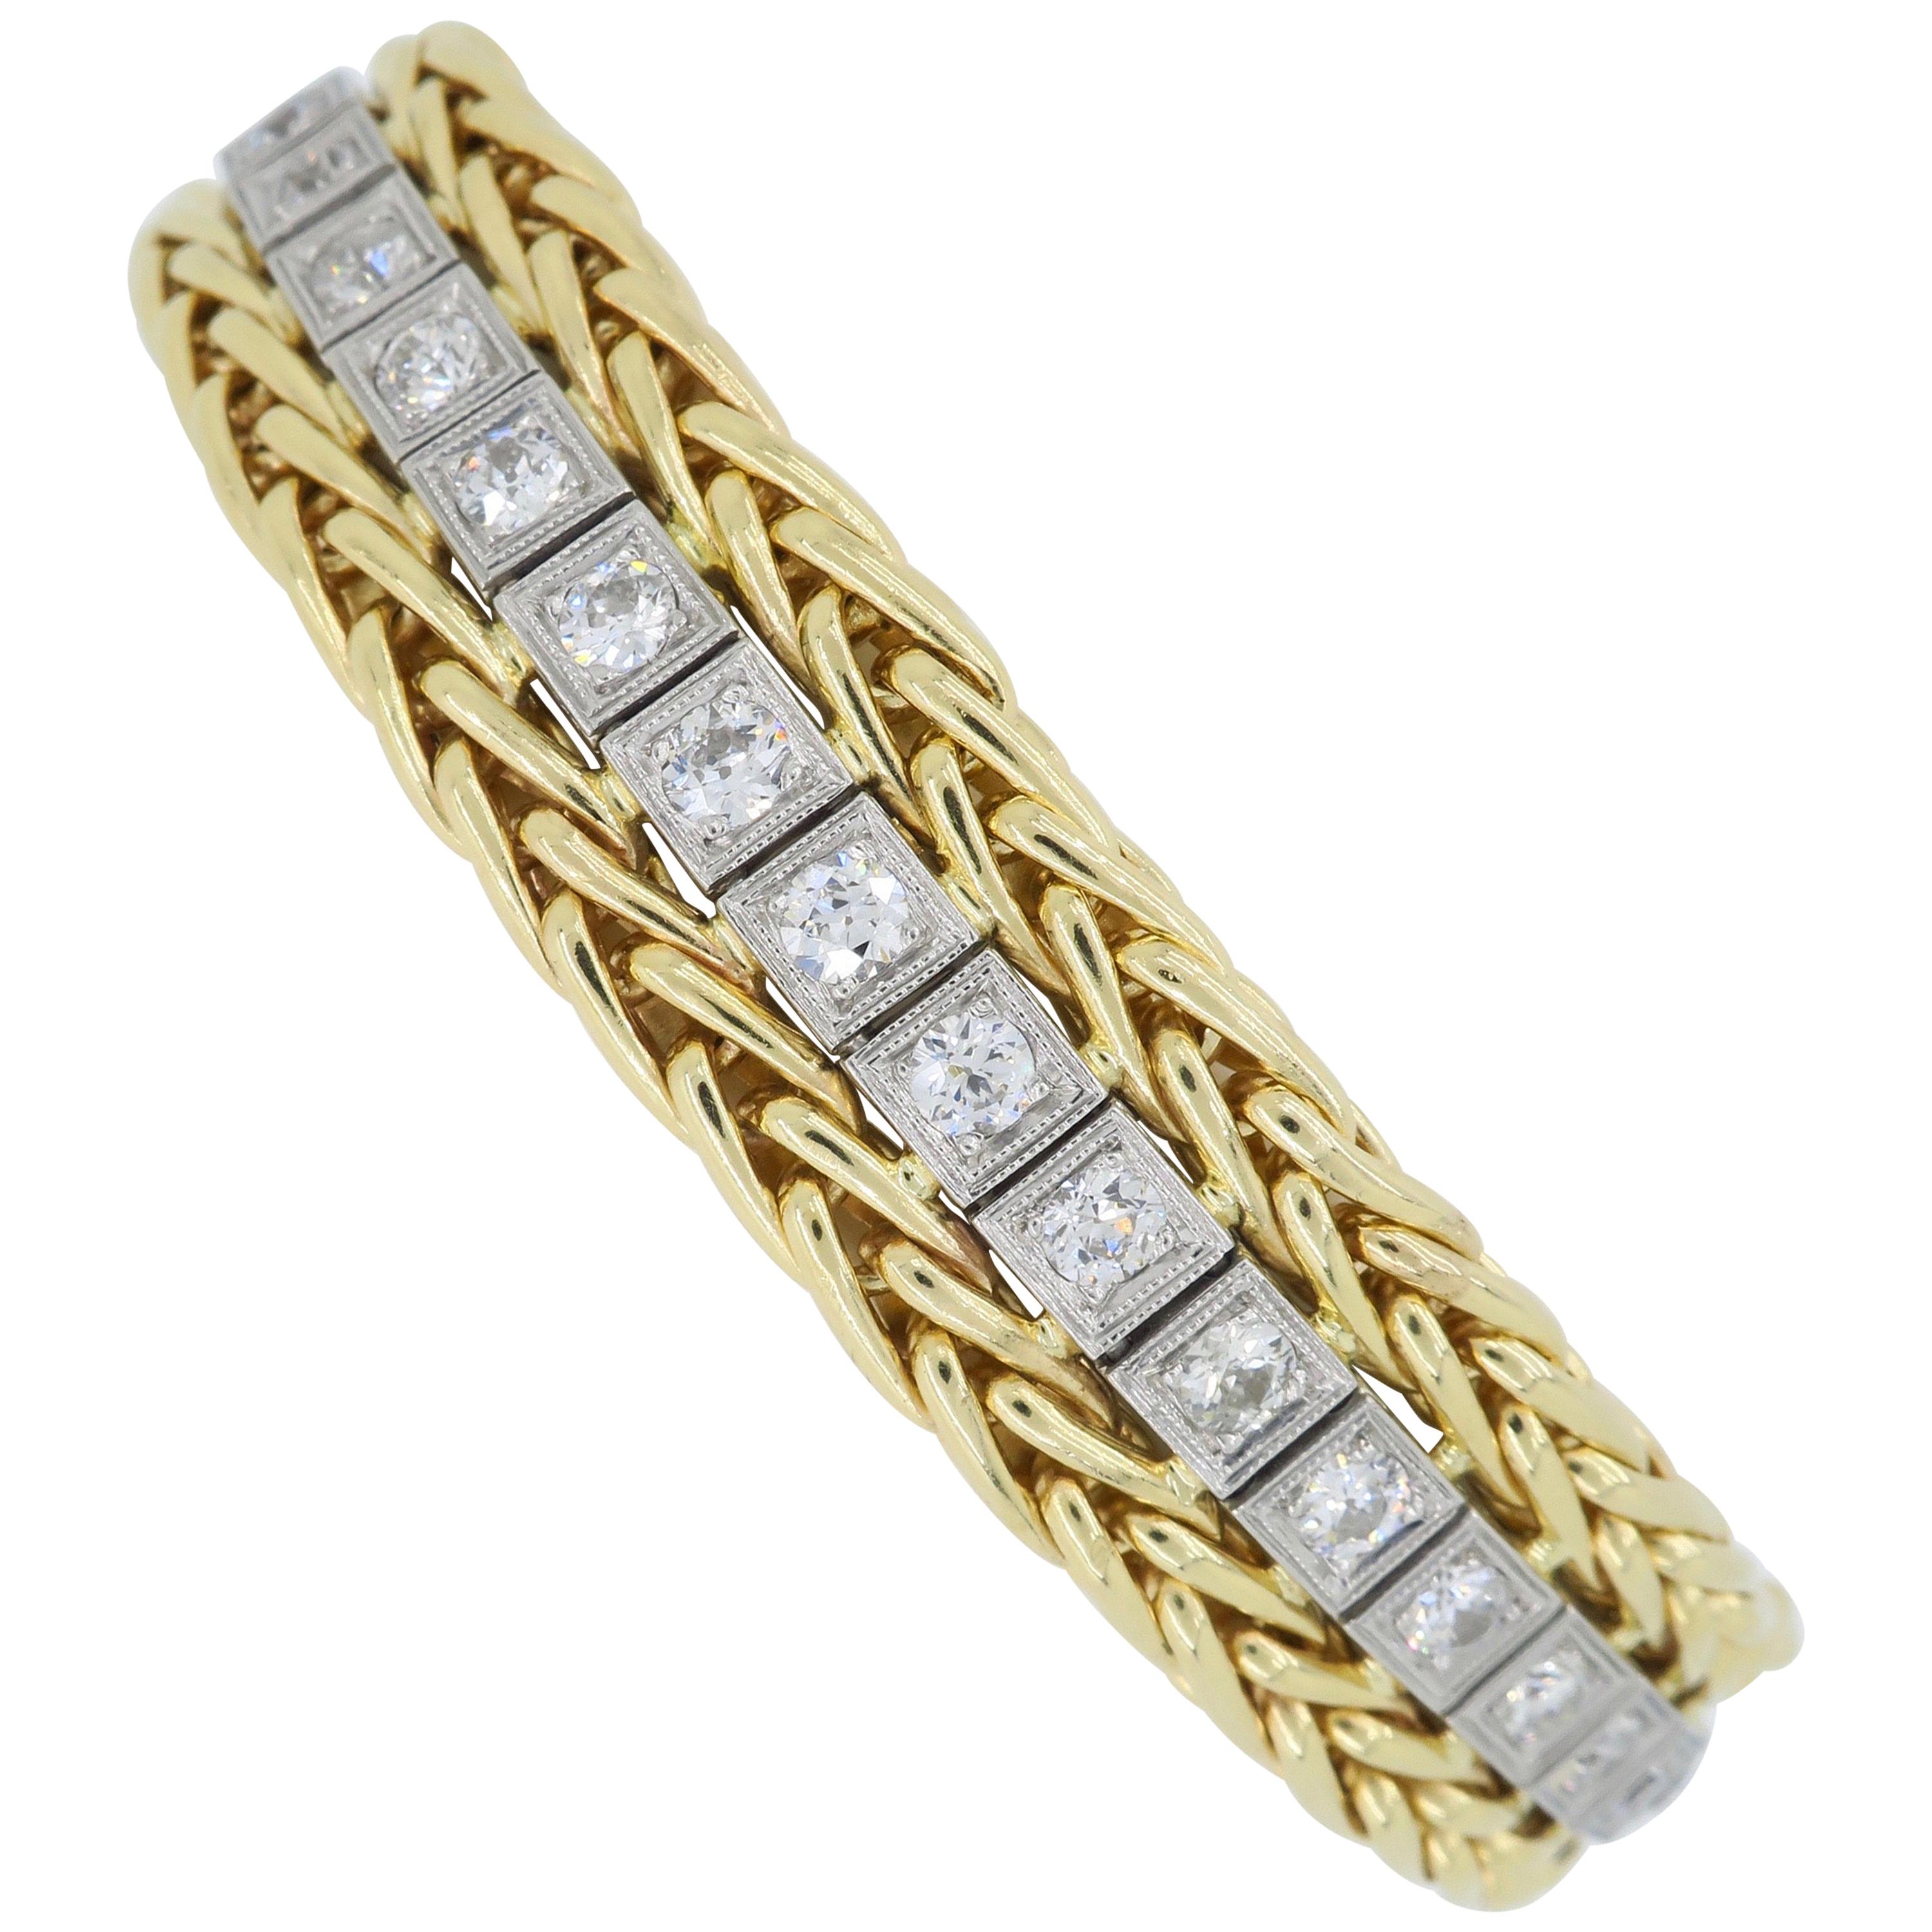 Vintage Diamond Line Bracelet in White and Yellow Gold